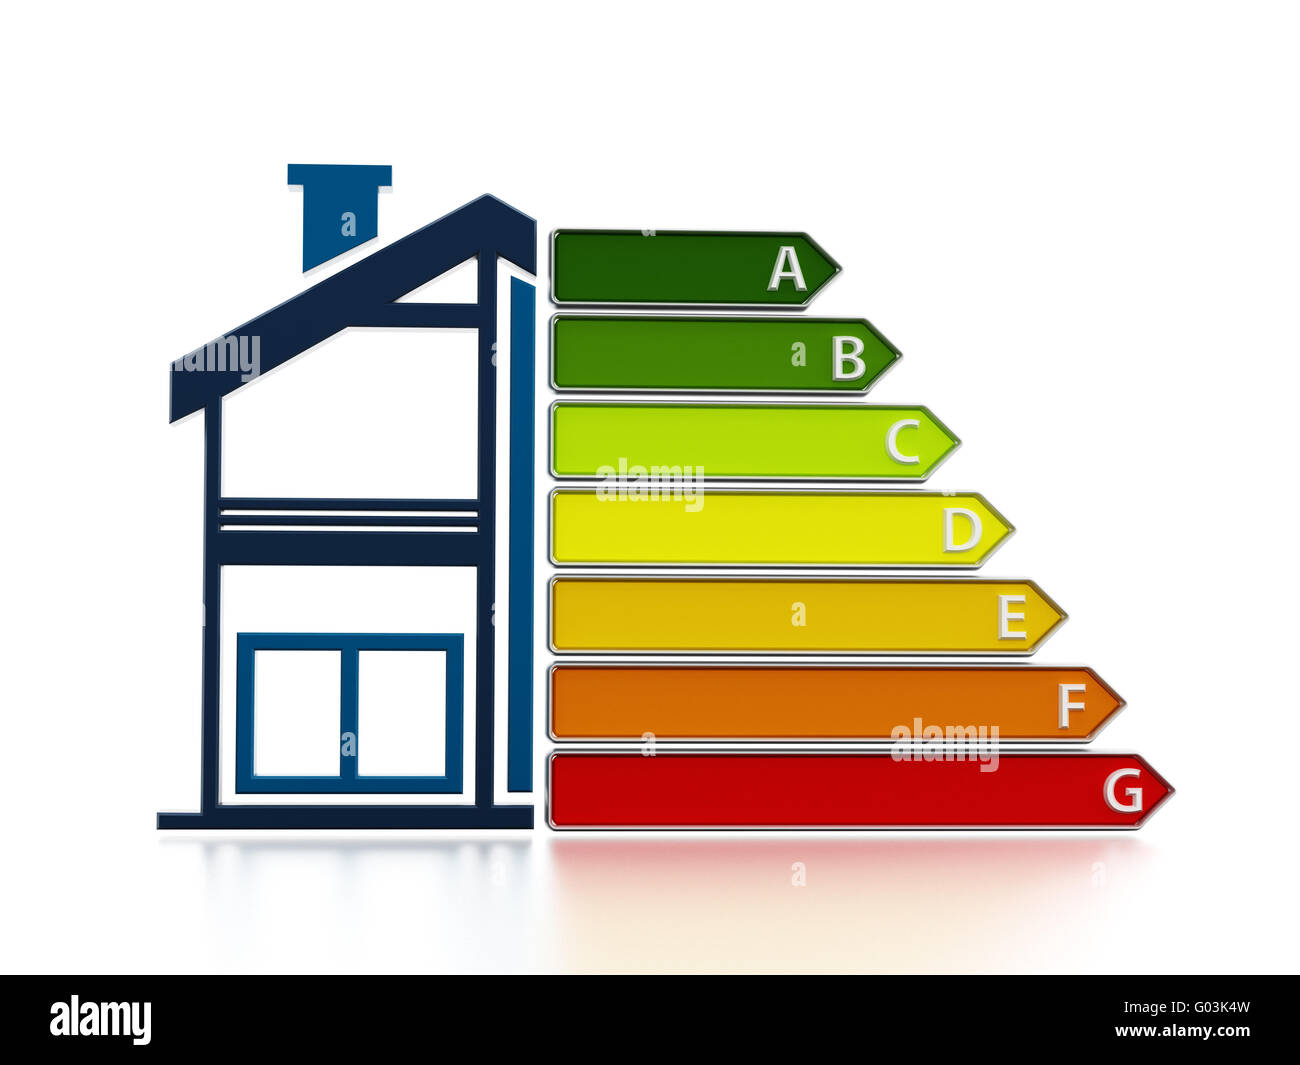 Energy efficiency chart with half illustration of a house. Stock Photo